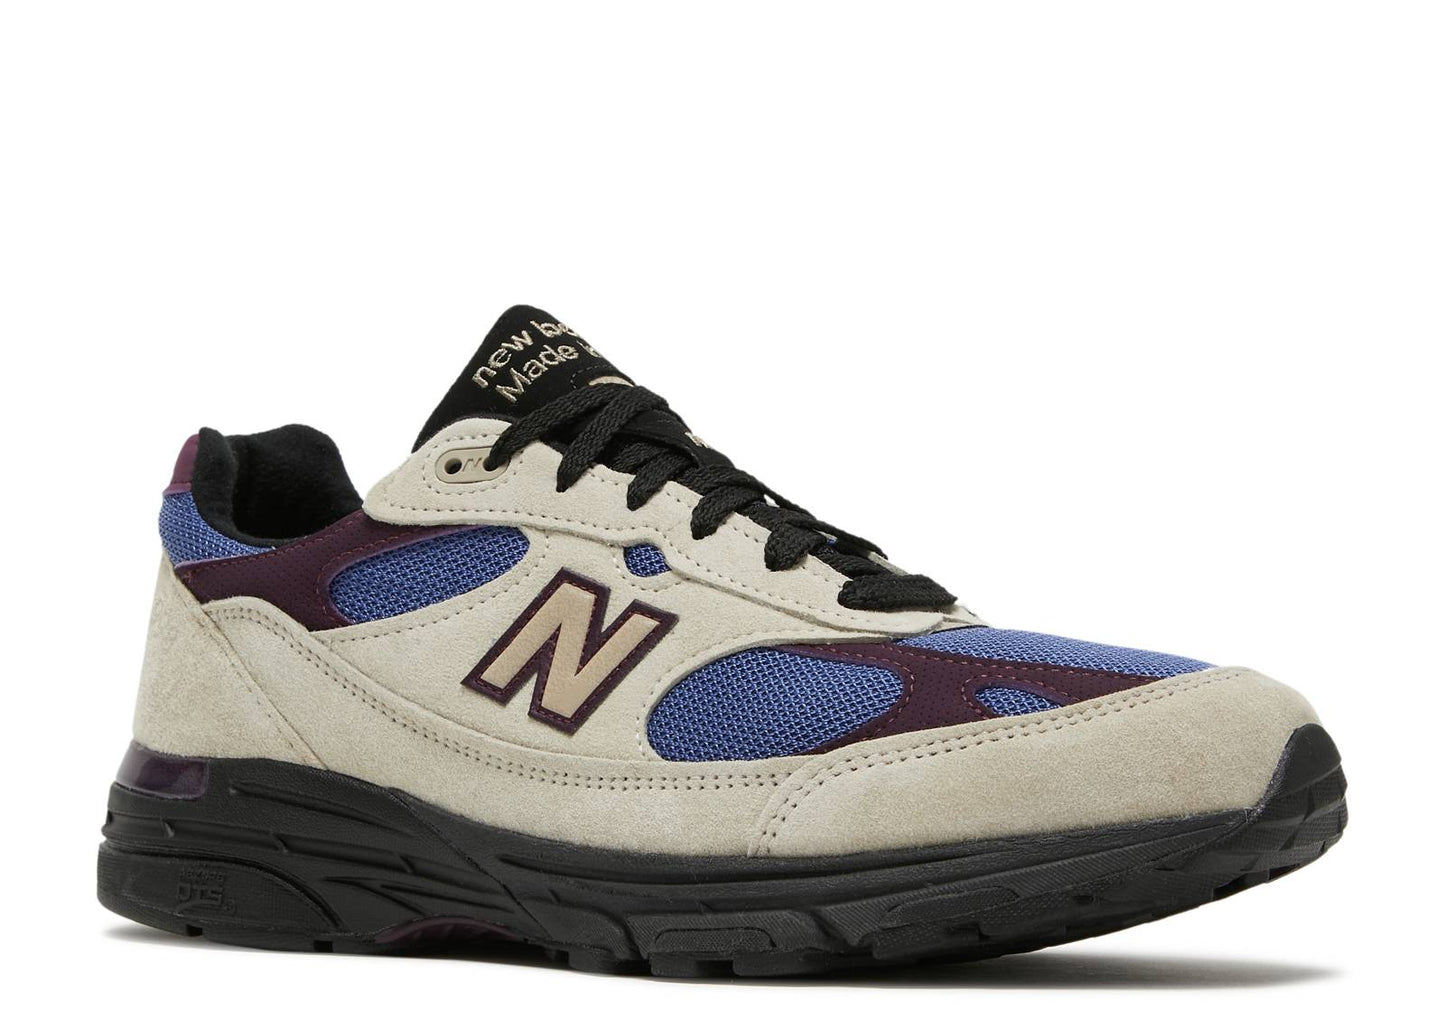 Aime Leon Dore x New Balance 993 Made In USA "Taupe"